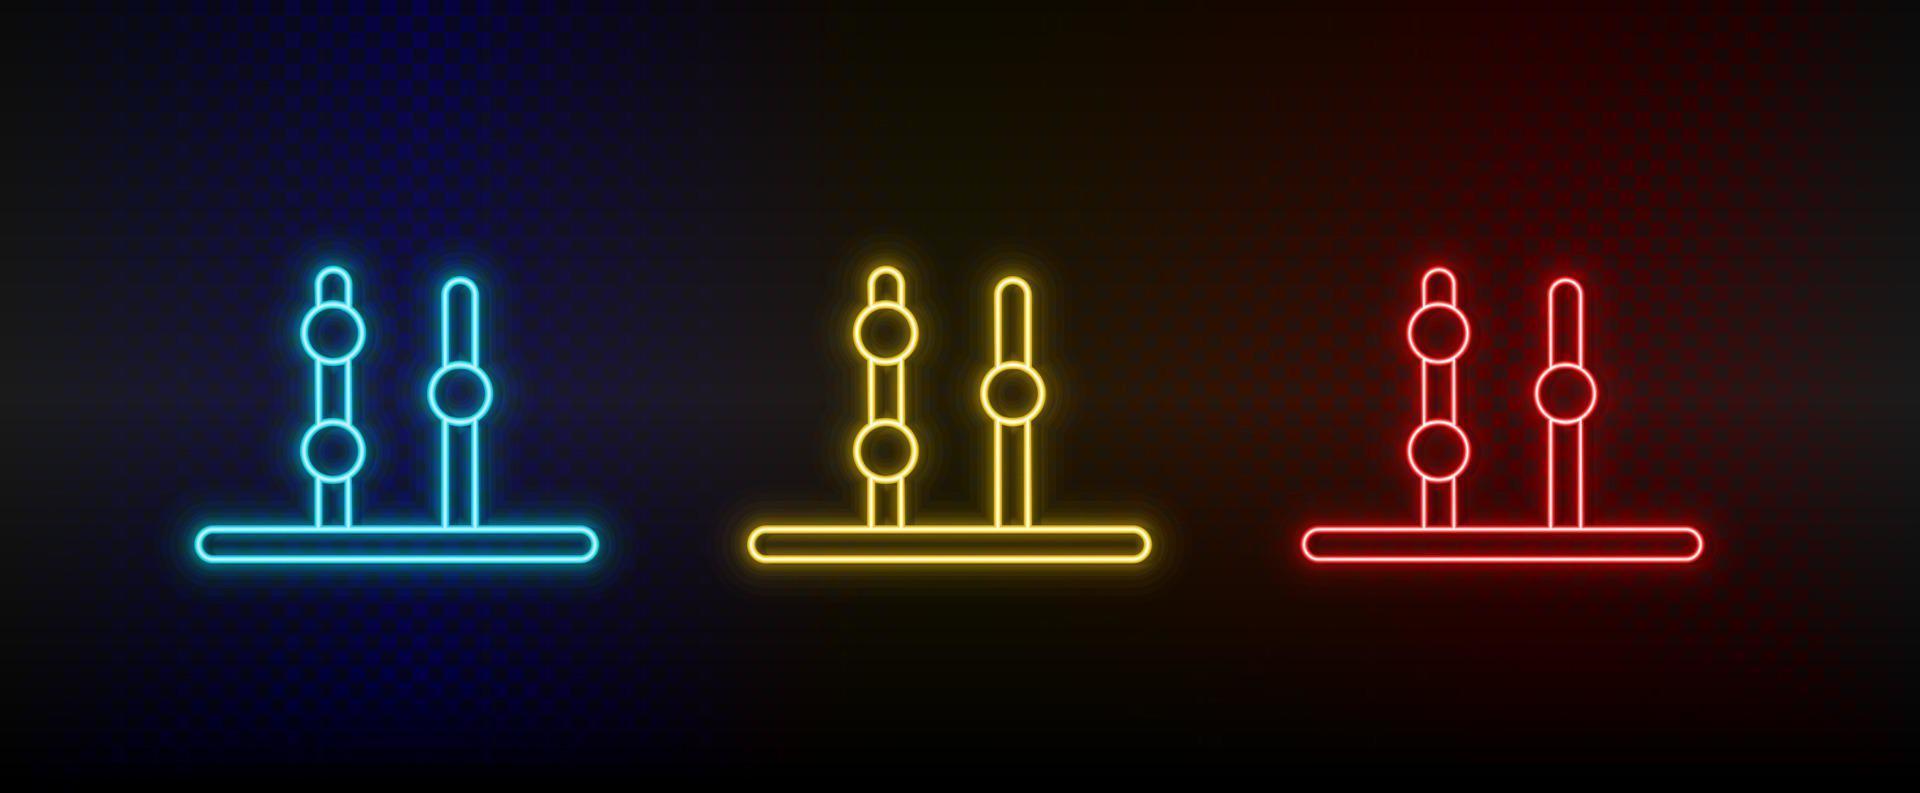 Neon icons, abacus, counting. Set of red, blue, yellow neon vector icon on darken transparent background